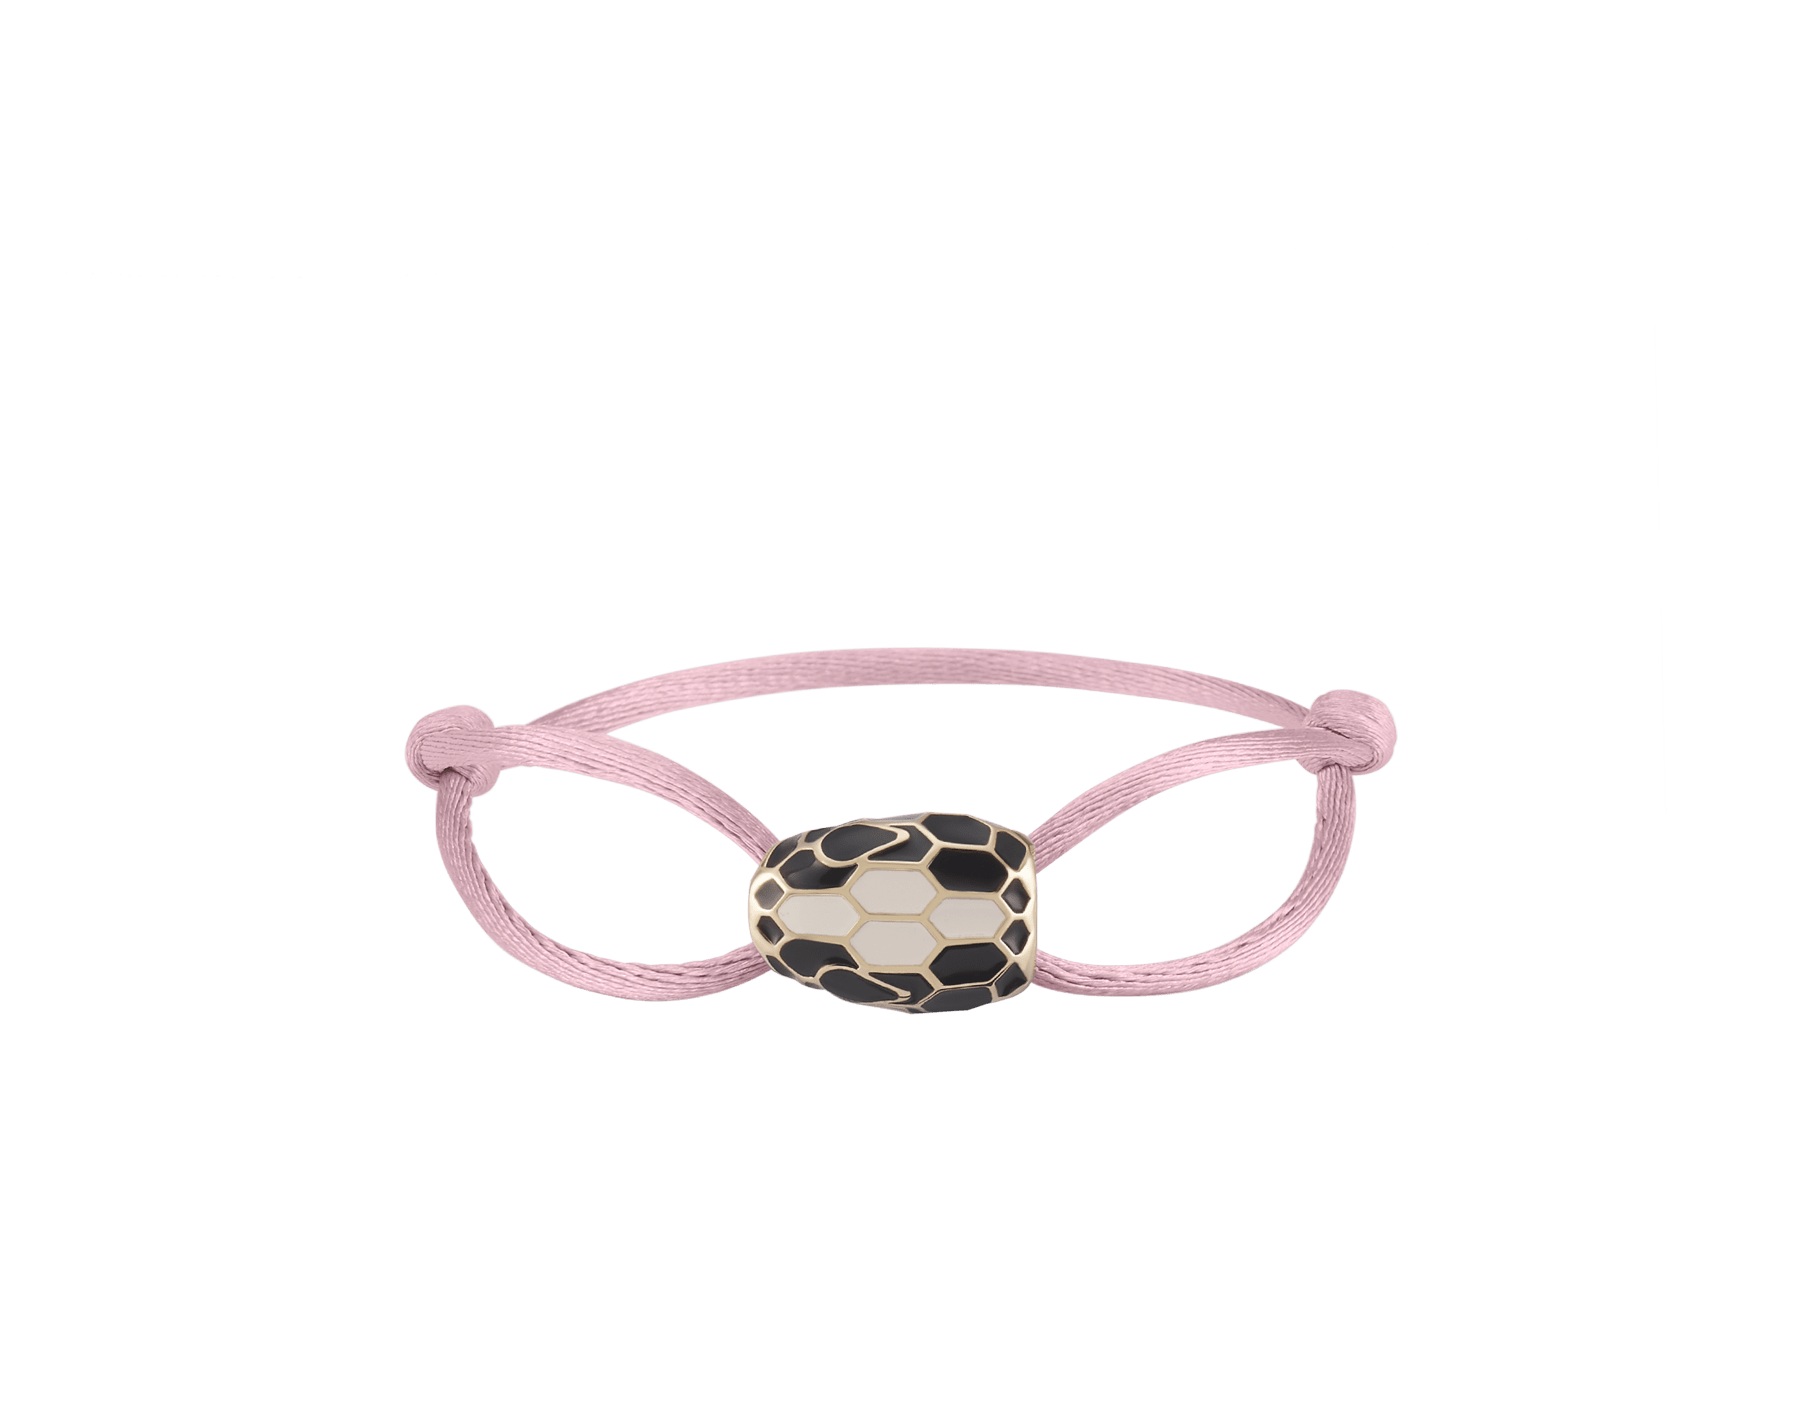 Serpenti Forever bracelet in foggy opal grey fabric. Captivating light gold-plated brass snakehead embellishment with black and white agate enamel scales and black enamel eyes. SERP-STRINGf image 1